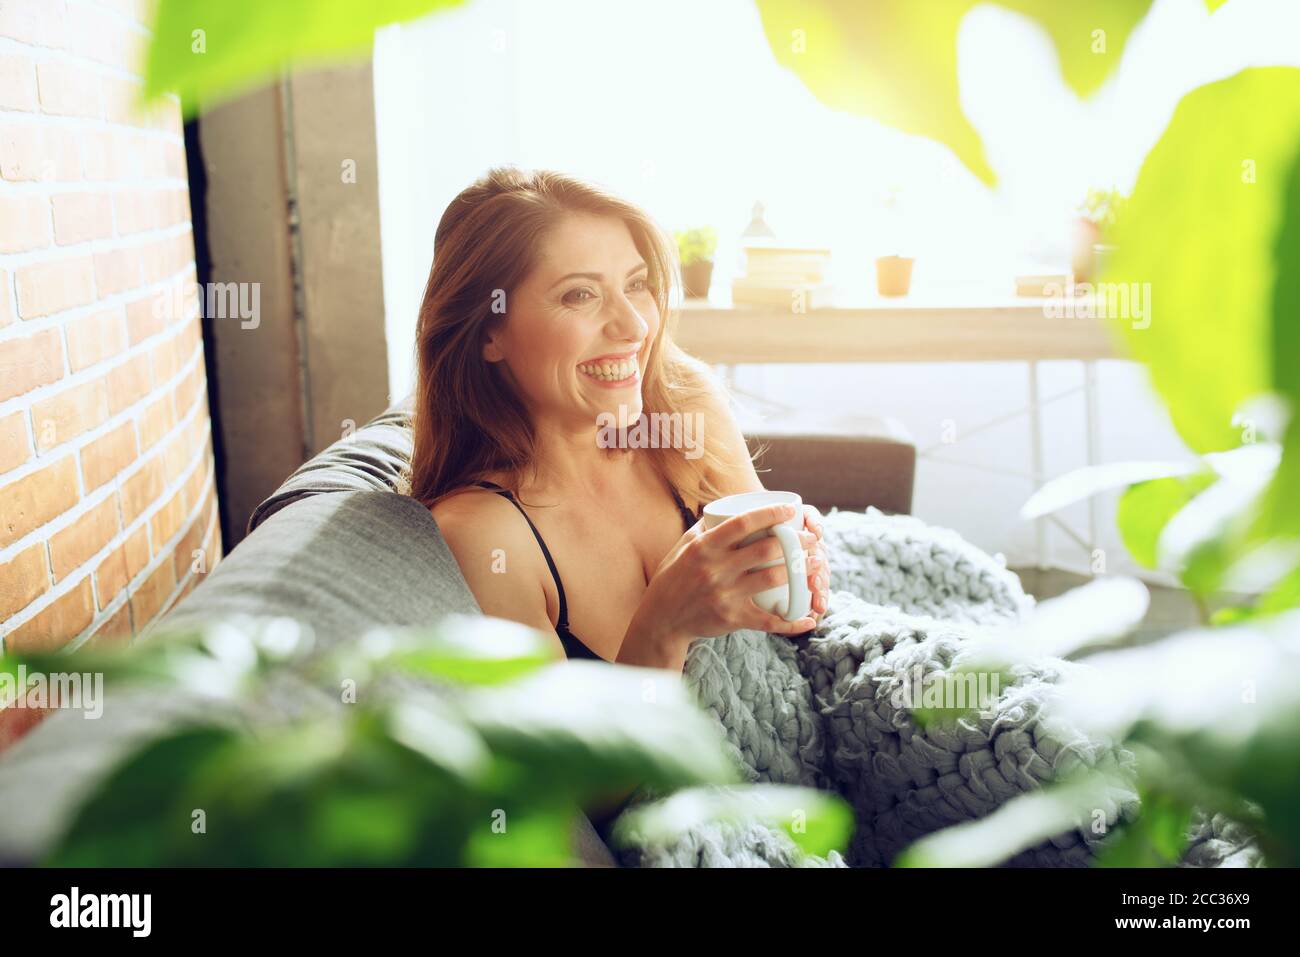 Brunette girl drinking cappuccino for breakfast on a sofa. Concept of relax. Stock Photo